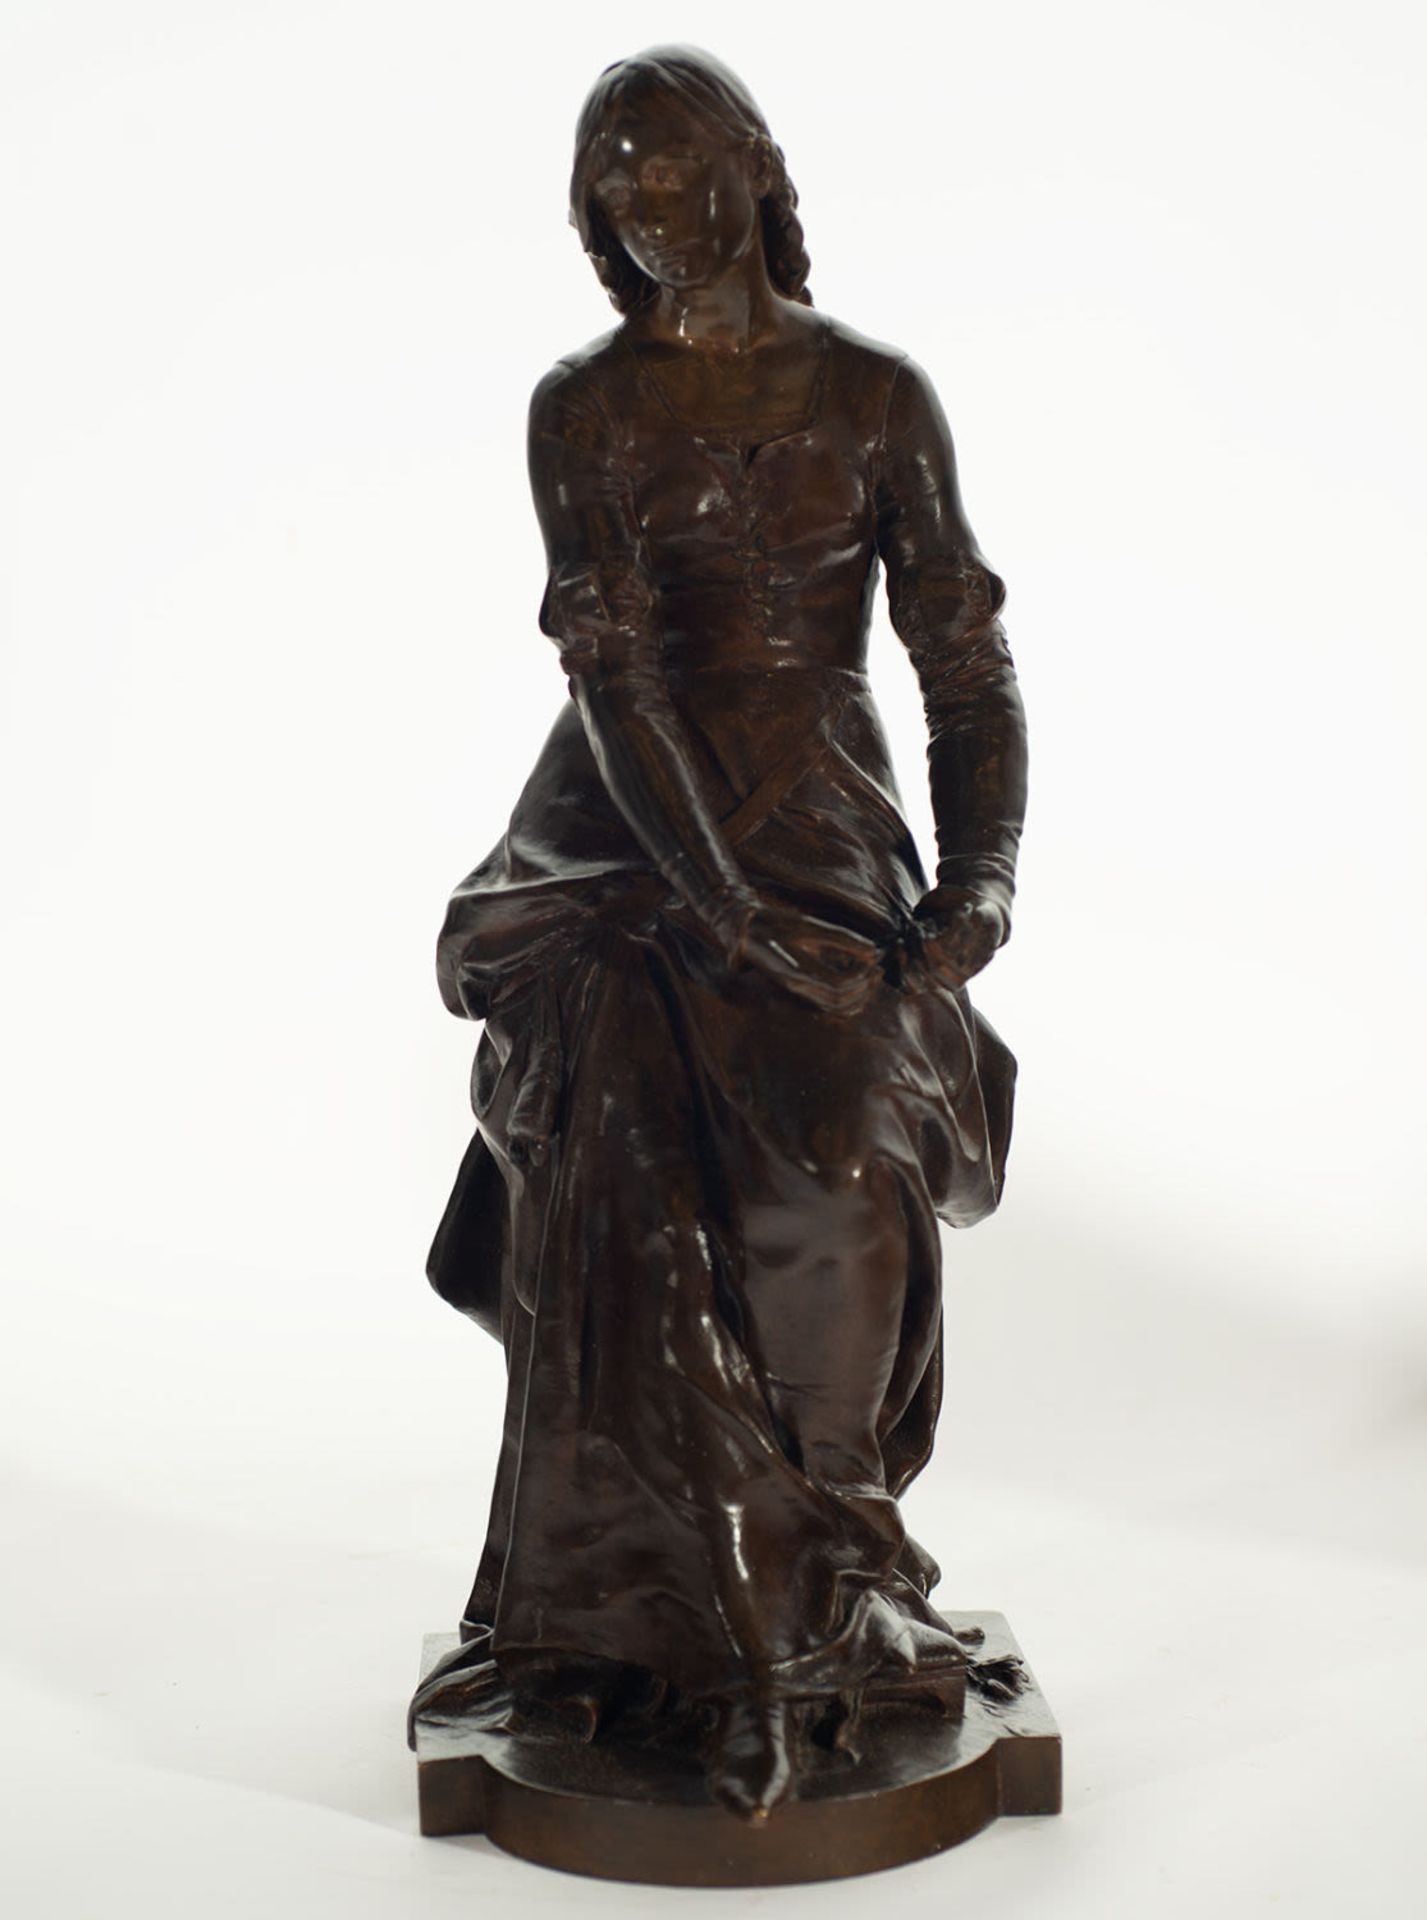 Girl with flower, bronze sculpture, 19th century French school.